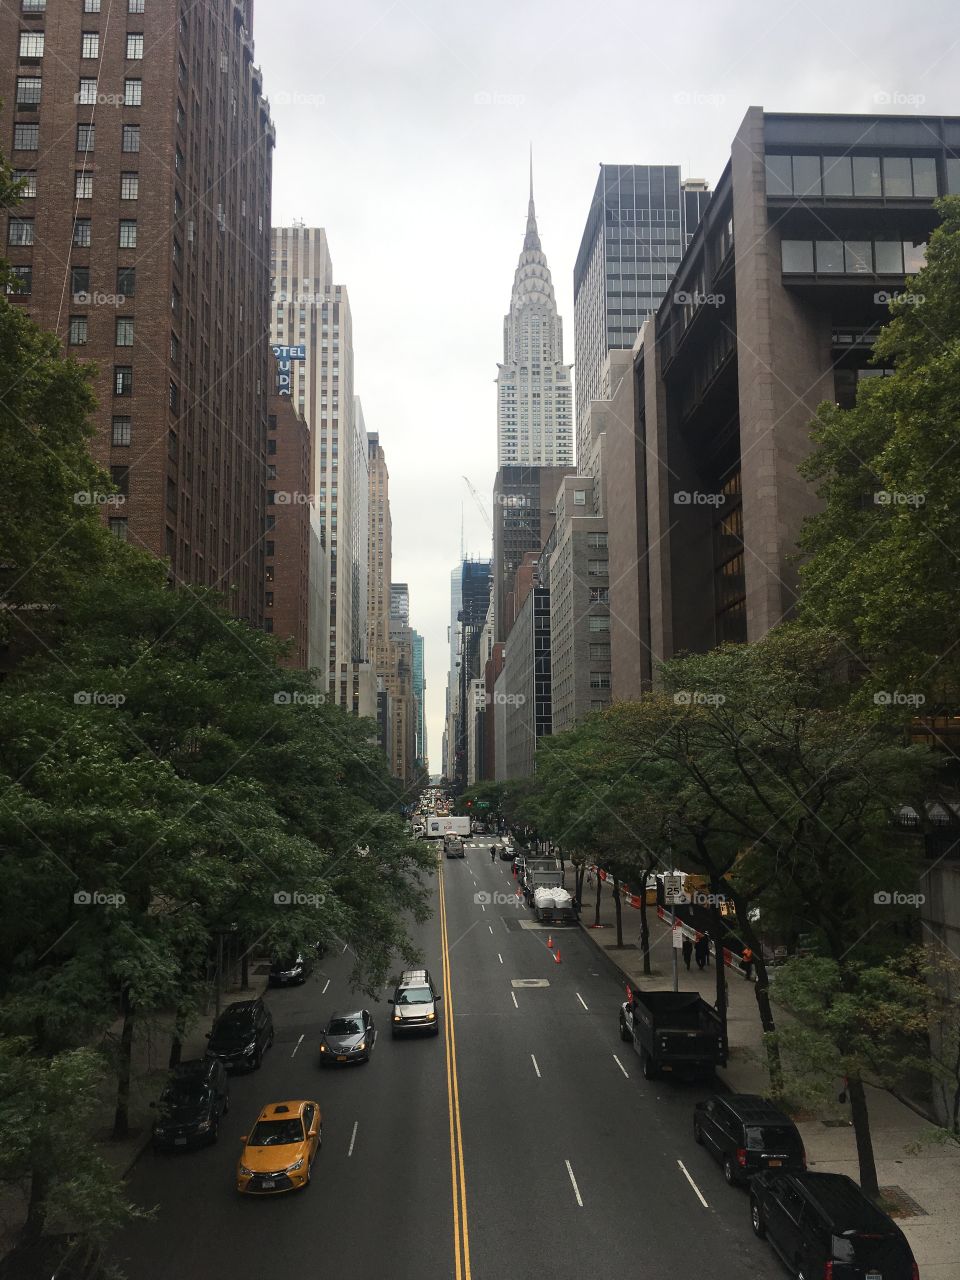 Chrysler Building and surrounding area